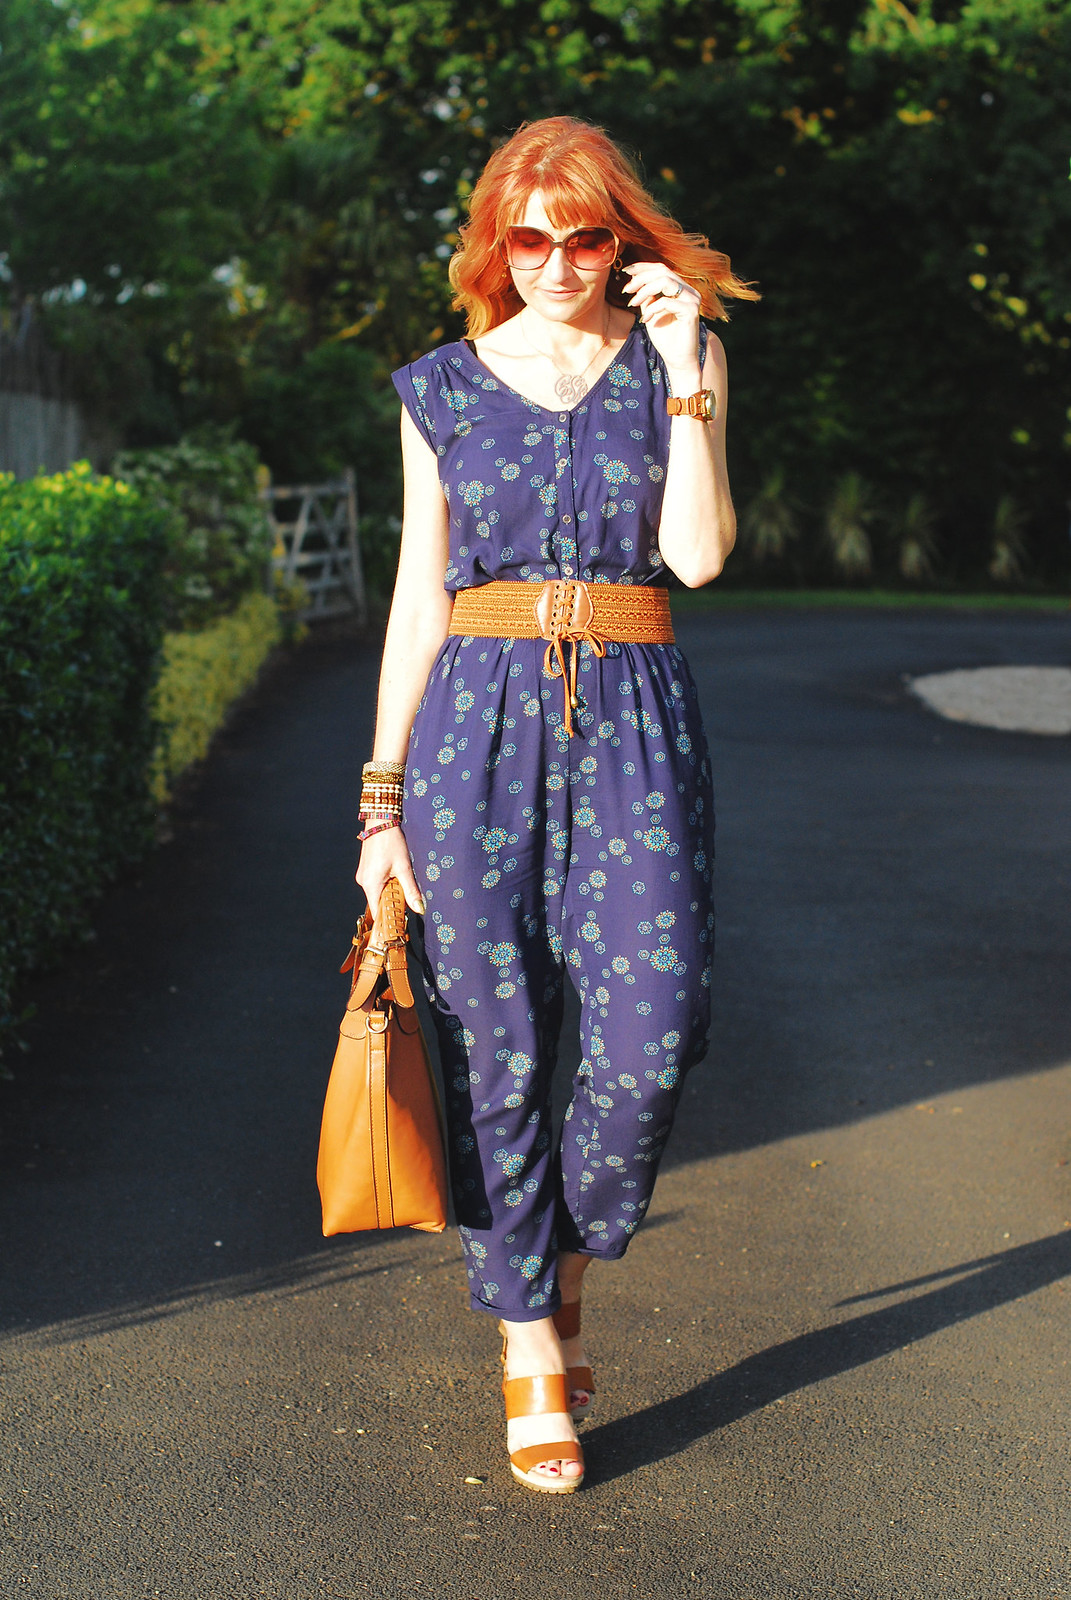 Simple summer styling: Blue floral jumpsuit with tan accessories | Not Dressed As Lamb